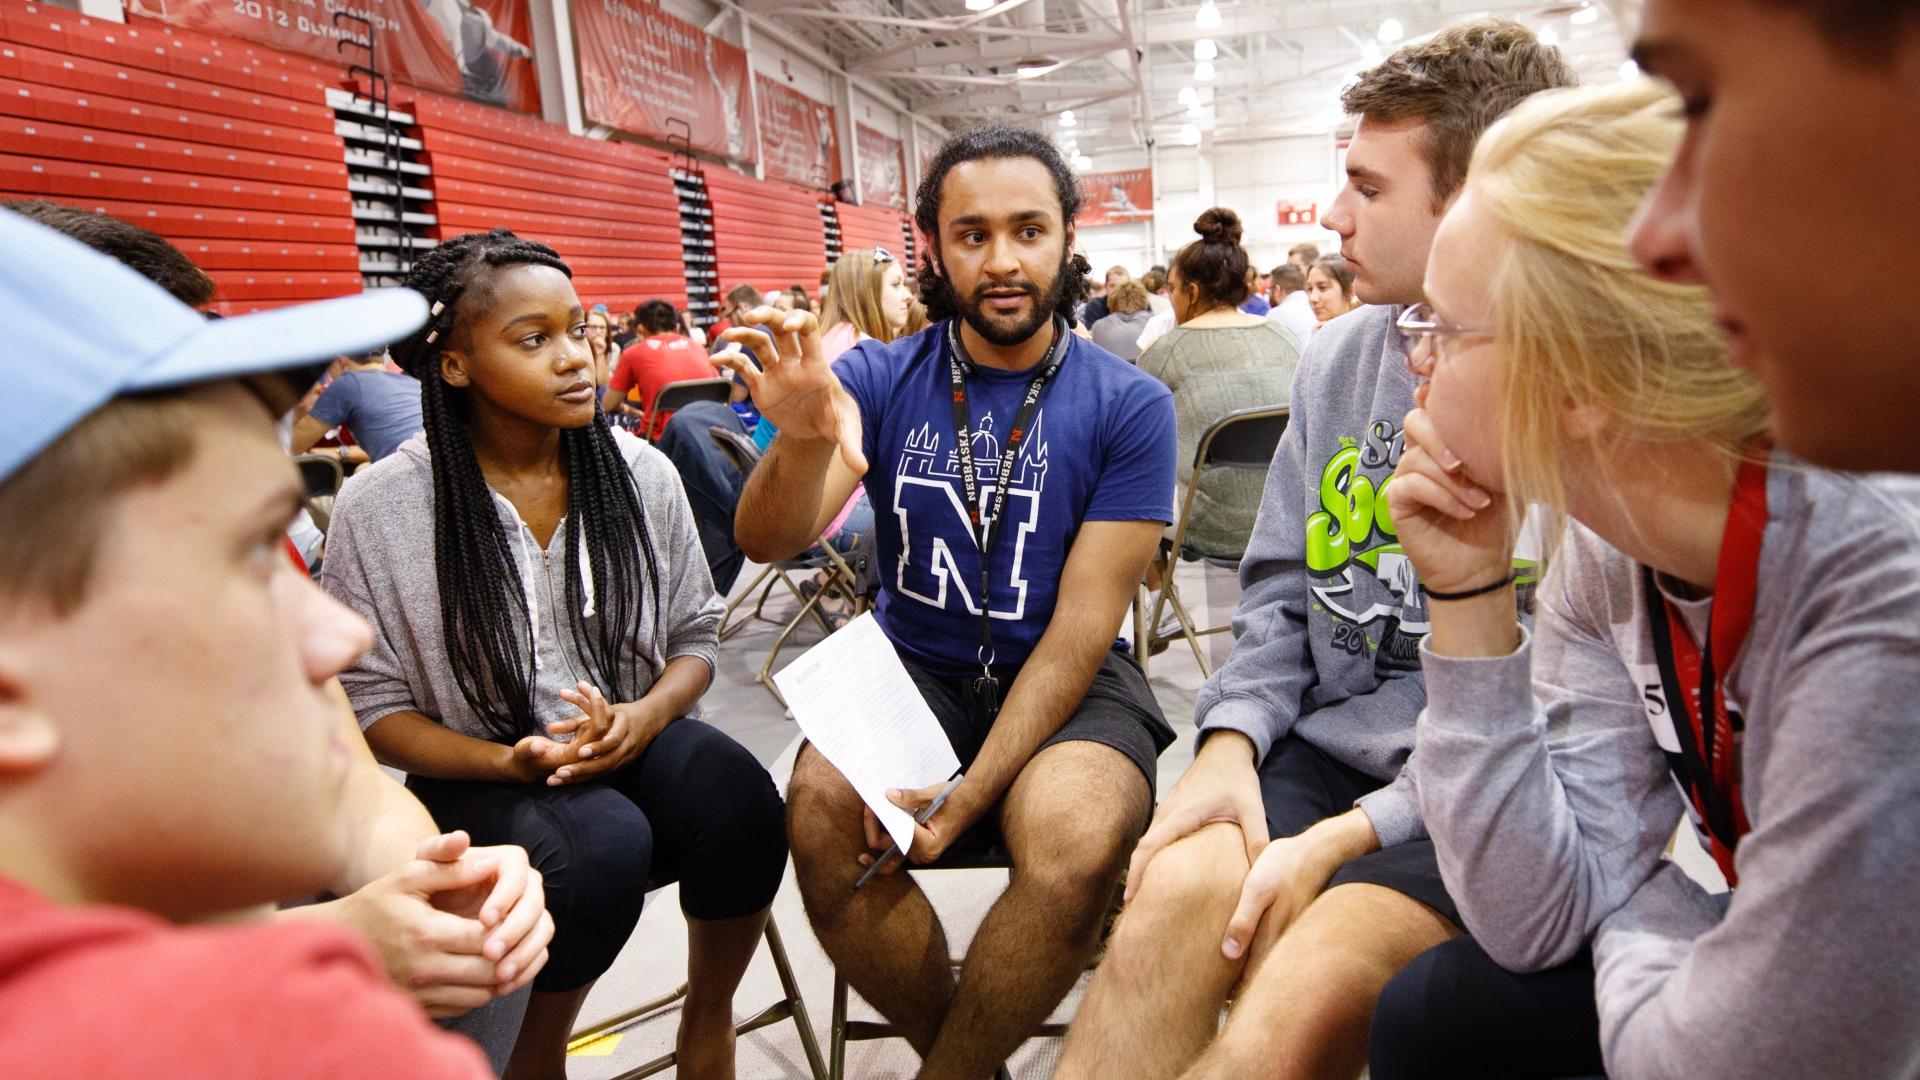 Husker Dialogues is led by student, faculty and staff who have the great responsibility of serving as conversation guides to facilitate the discussion between students.